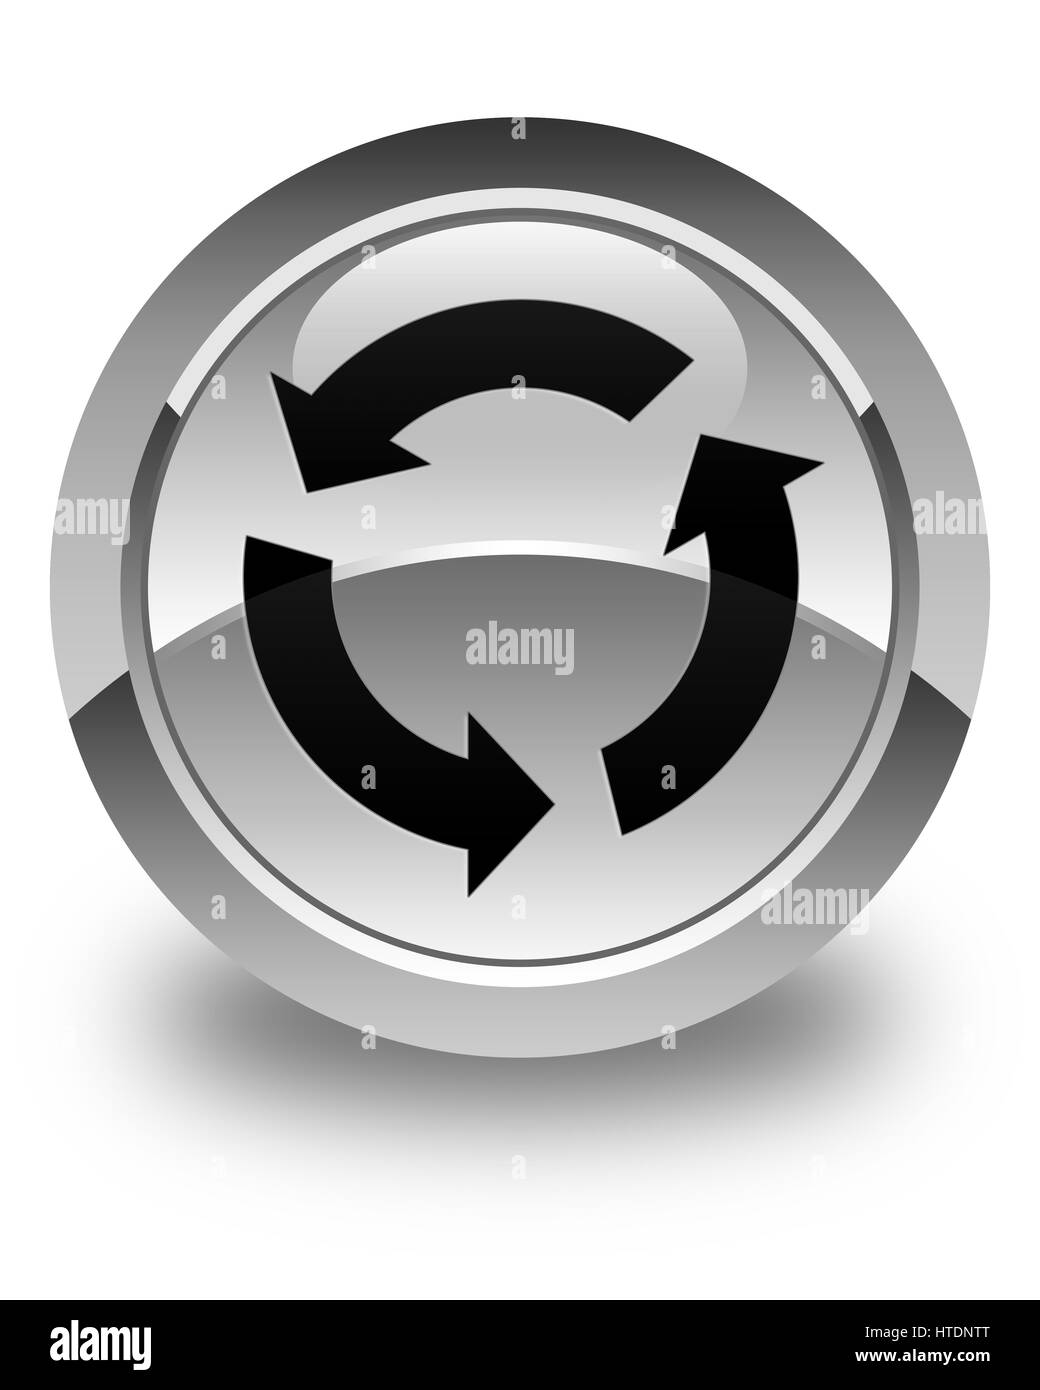 Refresh icon isolated on glossy white round button abstract illustration Stock Photo